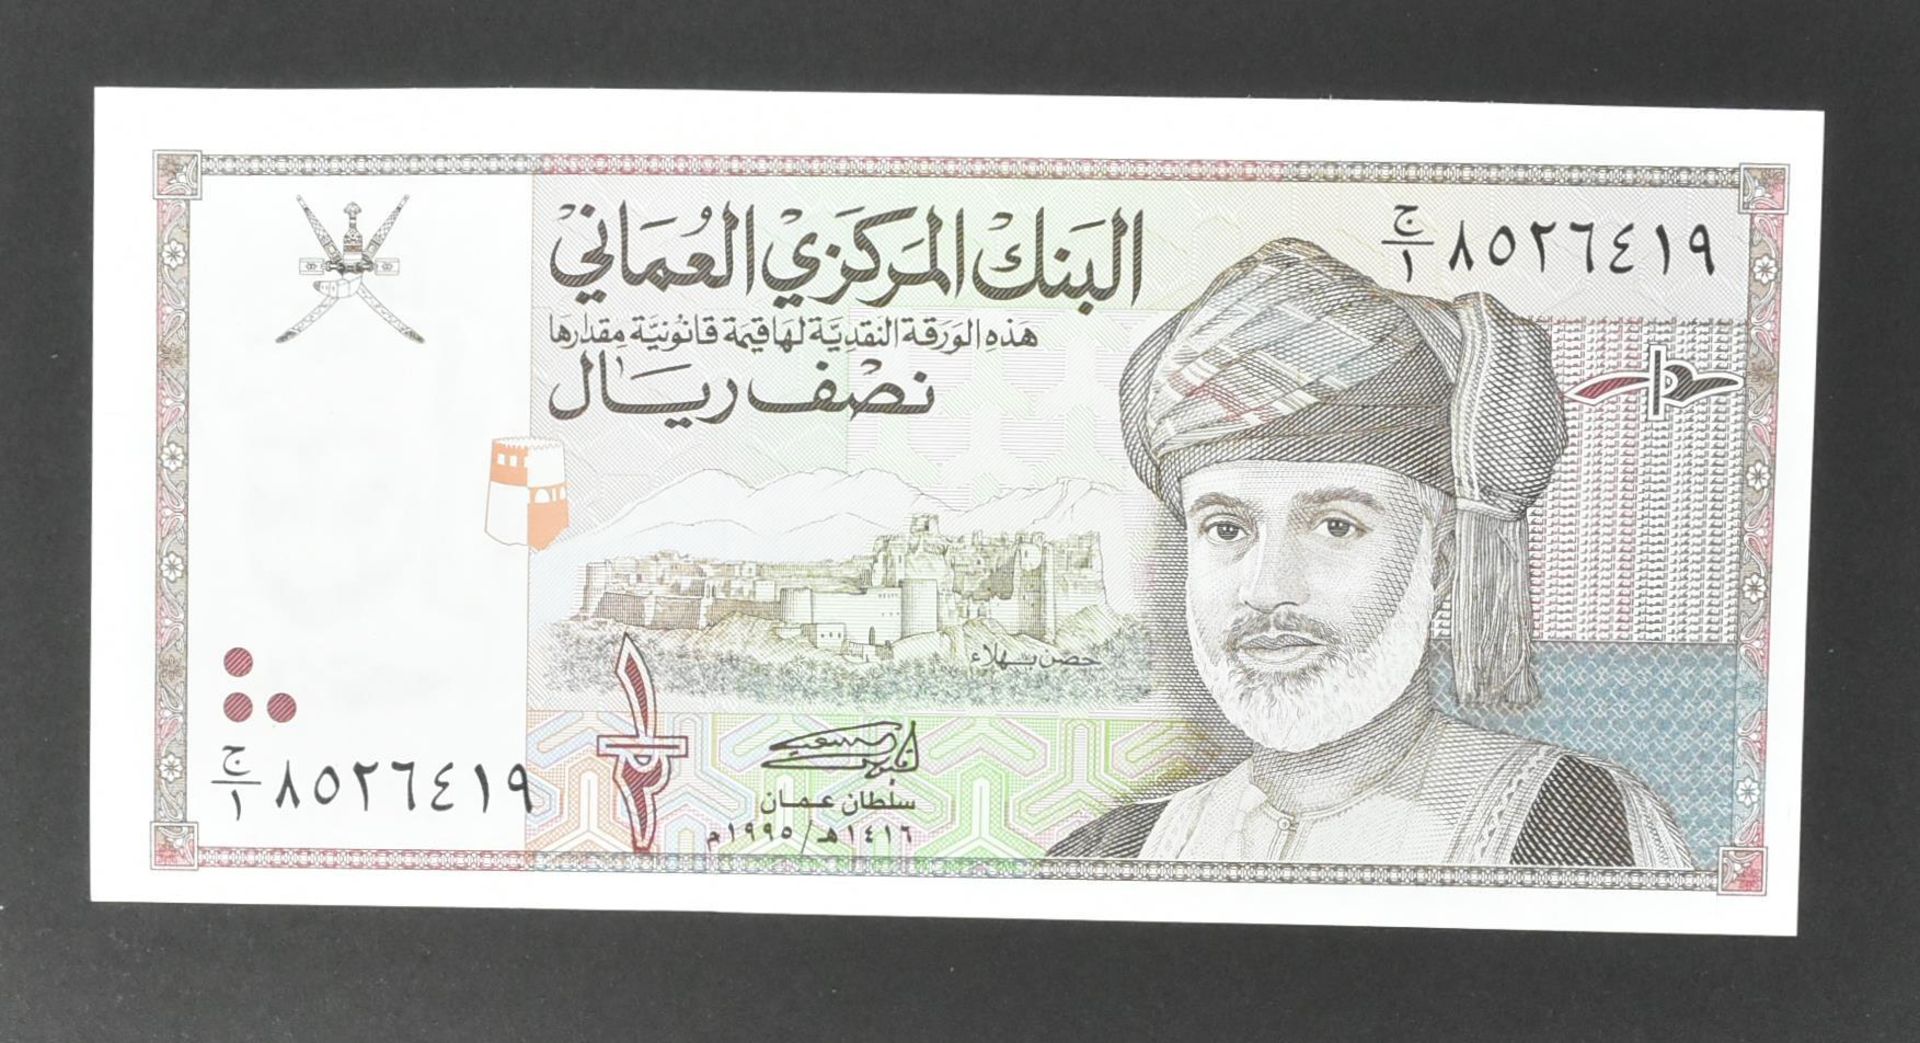 COLLECTION OF INTERNATIONAL UNCIRCULATED BANK NOTES - OMAN - Image 9 of 51